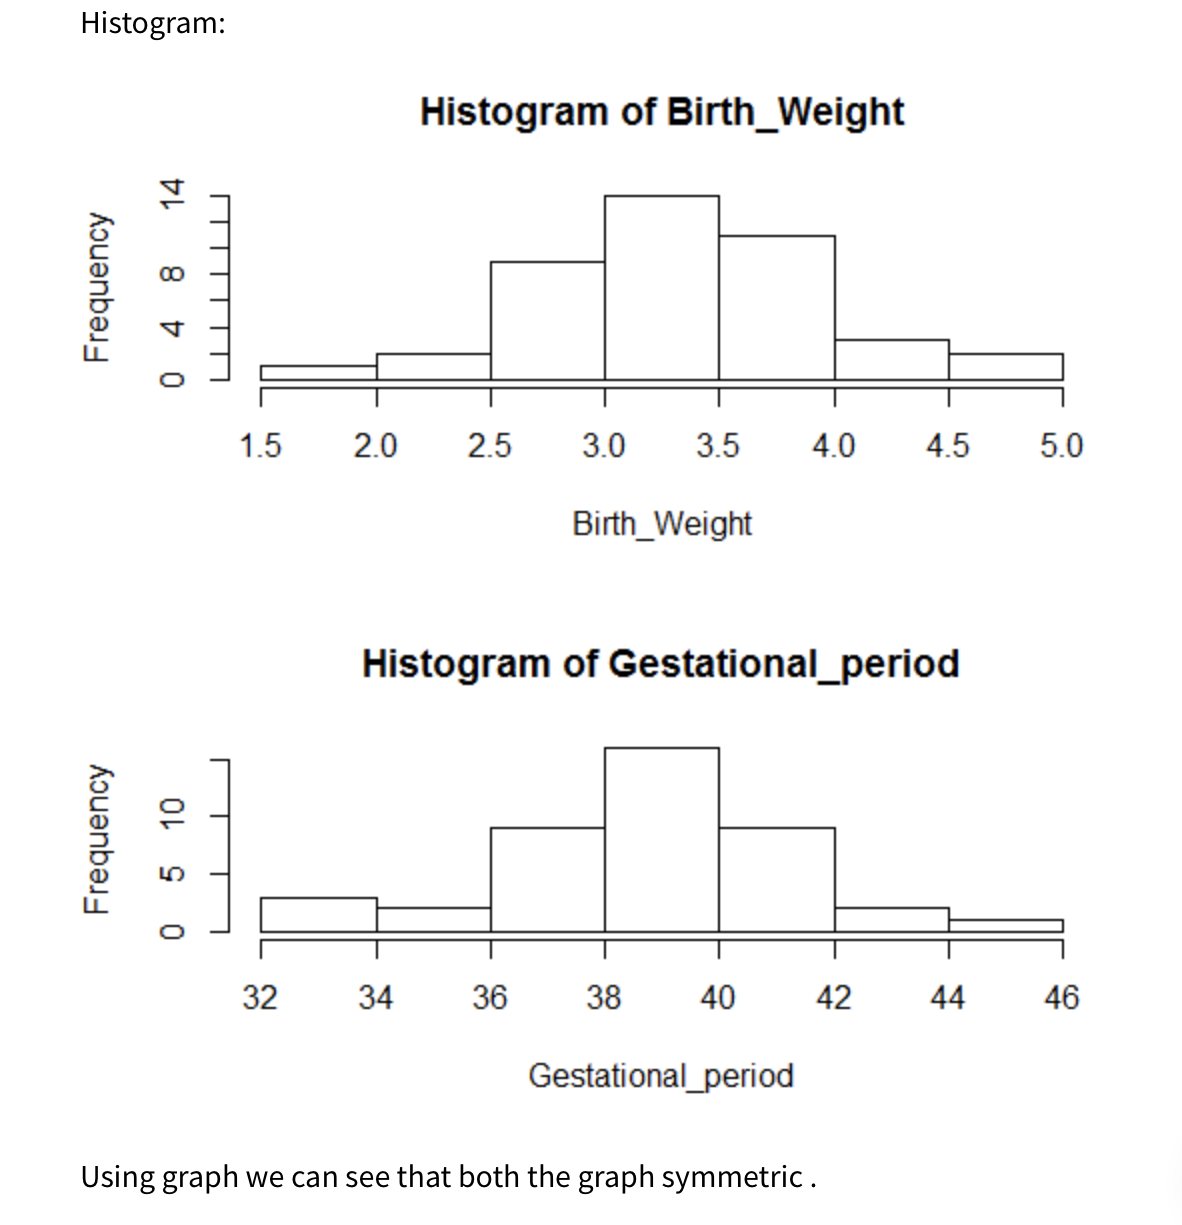 Histogram:
Histogram of Birth_Weight
1.5
2.0
2.5
3.0
3.5
4.0
4.5
5.0
Birth_Weight
Histogram of Gestational_period
32
34
36
38
40
42
44
46
Gestational_period
Using graph we can see that both the graph symmetric.
Frequency
05 10
